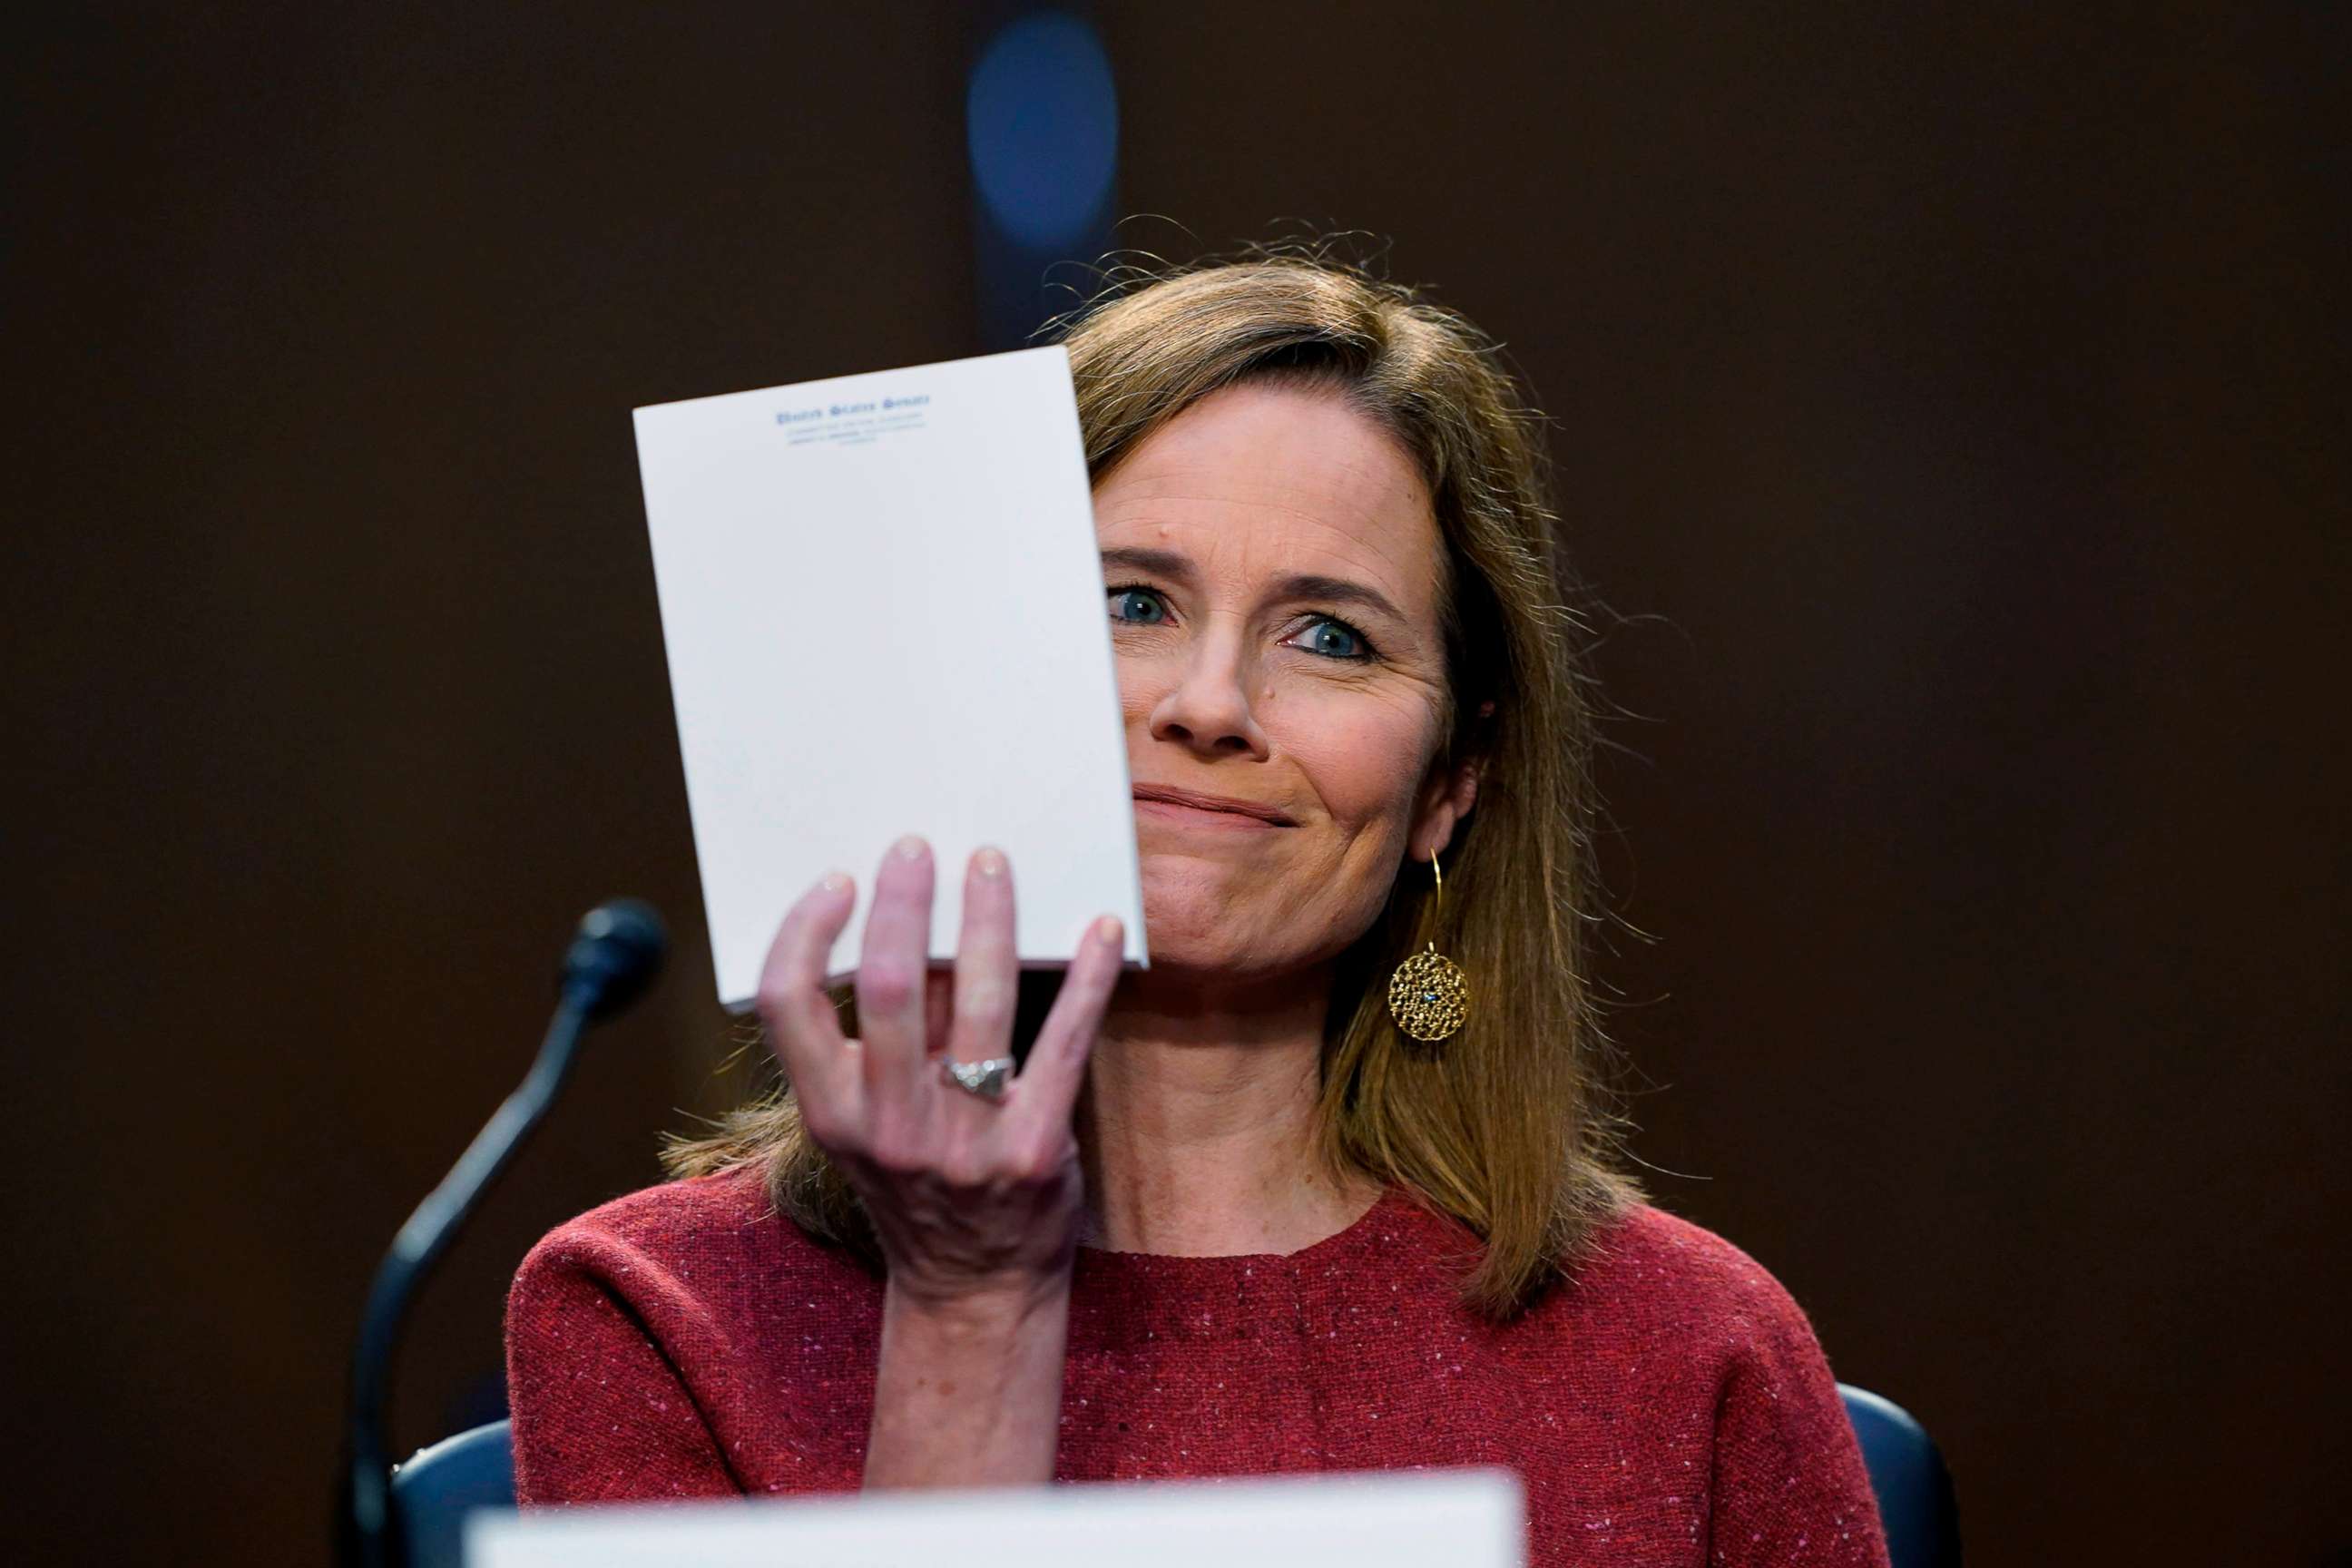 PHOTO: Supreme Court nominee Judge Amy Coney Barrett holds up pad of paper after being asked what material she was referring to during the second day of her confirmation hearing on Capitol Hill, Oct. 13, 2020, in Washington, D.C.